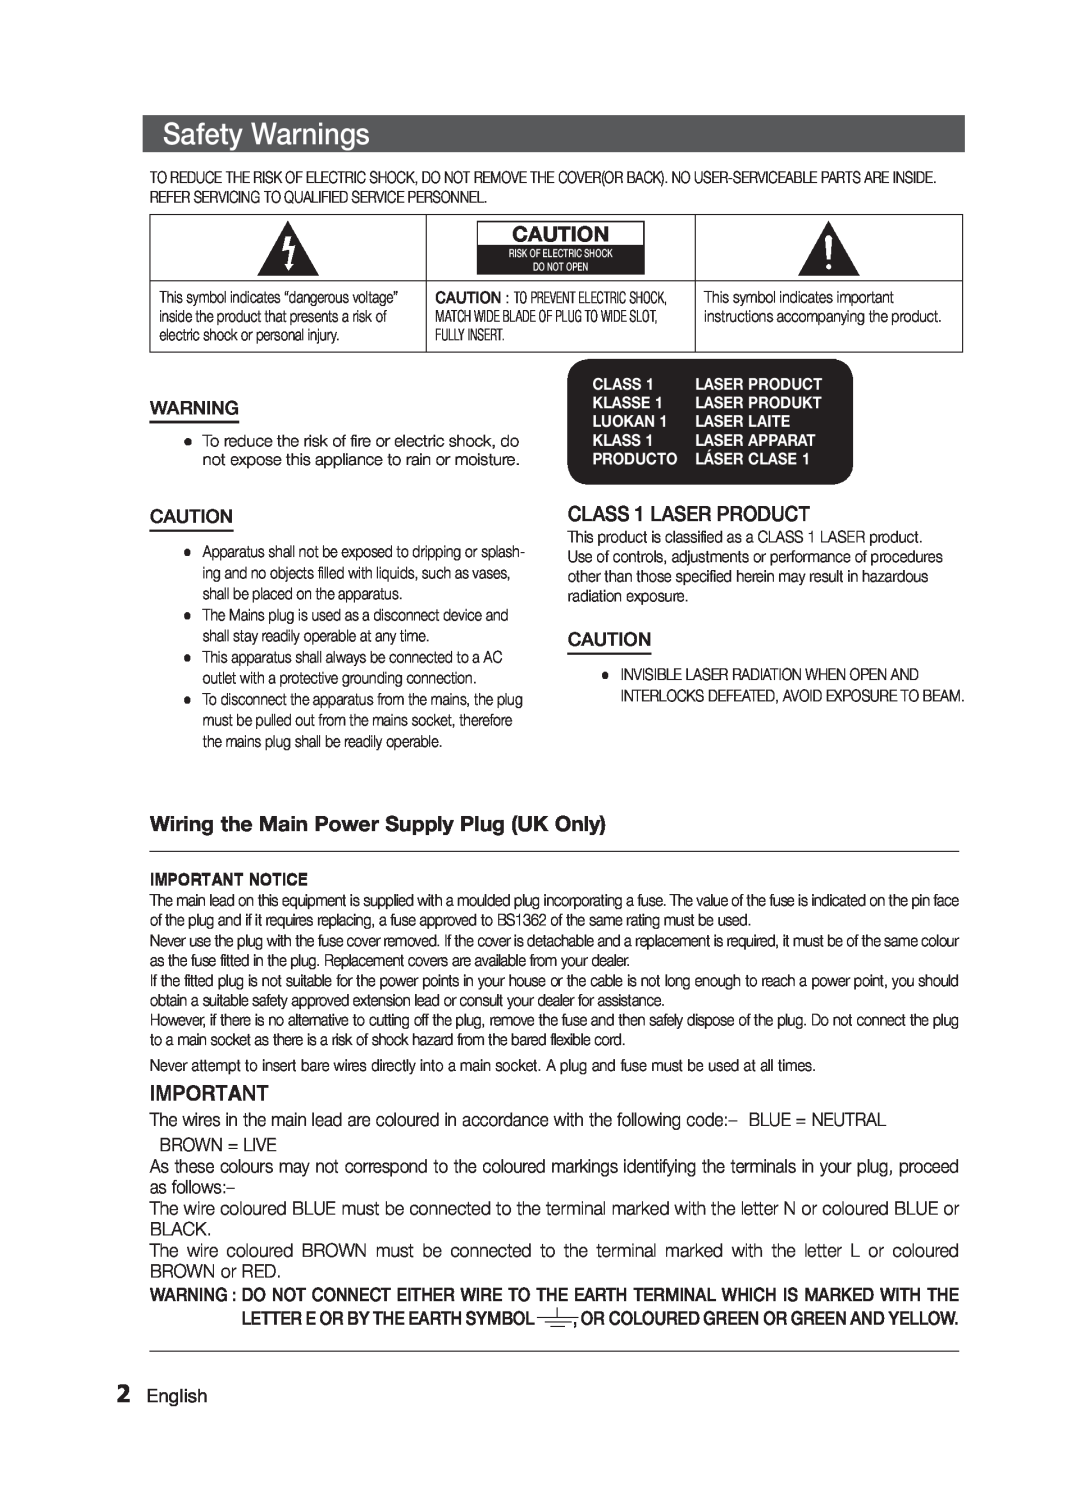 Samsung MM-E330/ZF, MM-E330/EN manual Safety Warnings, CLASS 1 LASER PRODUCT, Wiring the Main Power Supply Plug UK Only 